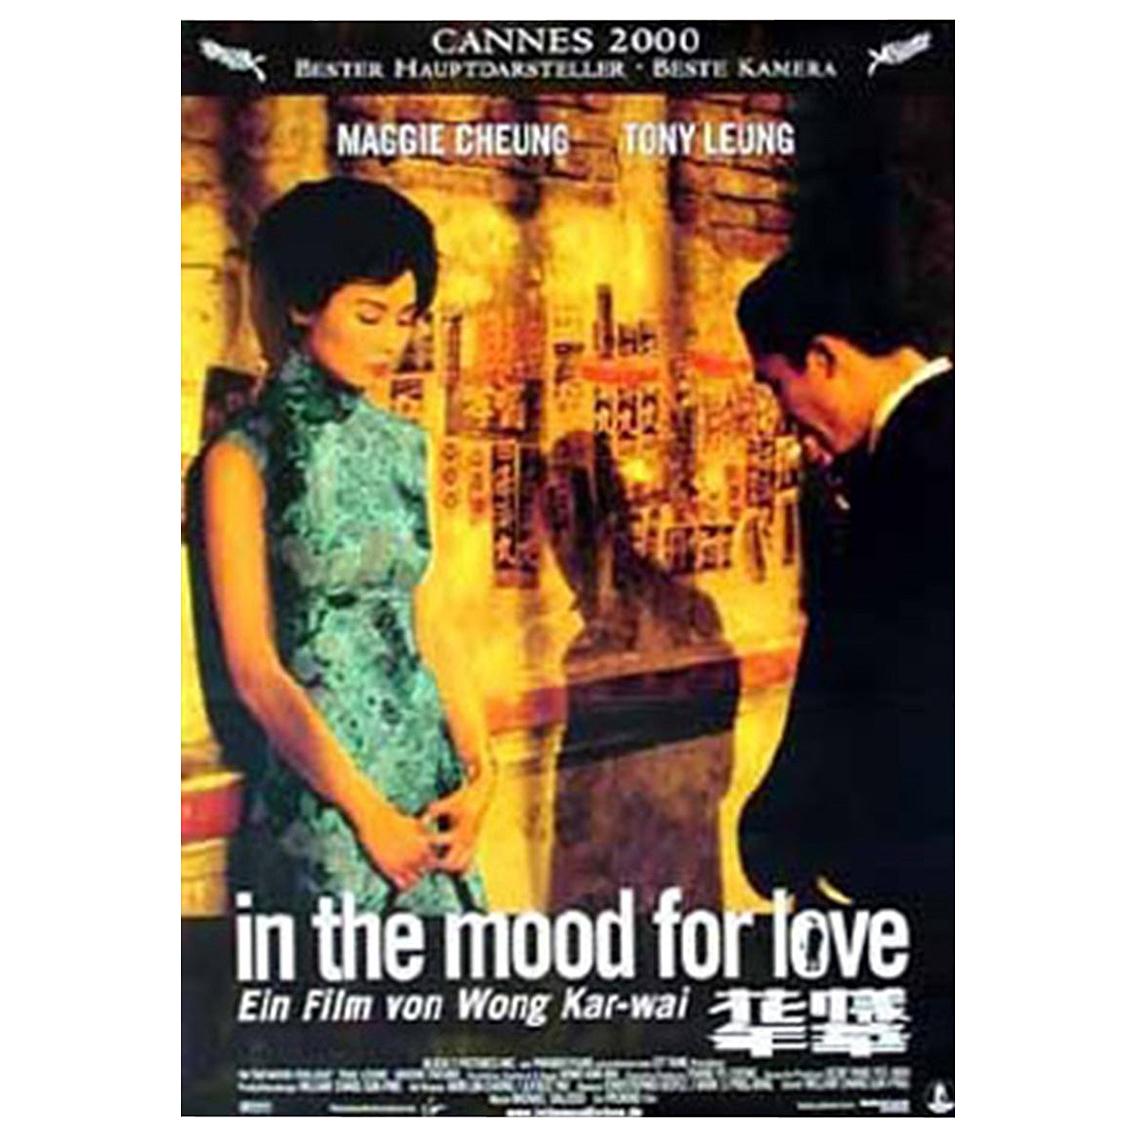 "In The Mood For Love" 2000 Poster